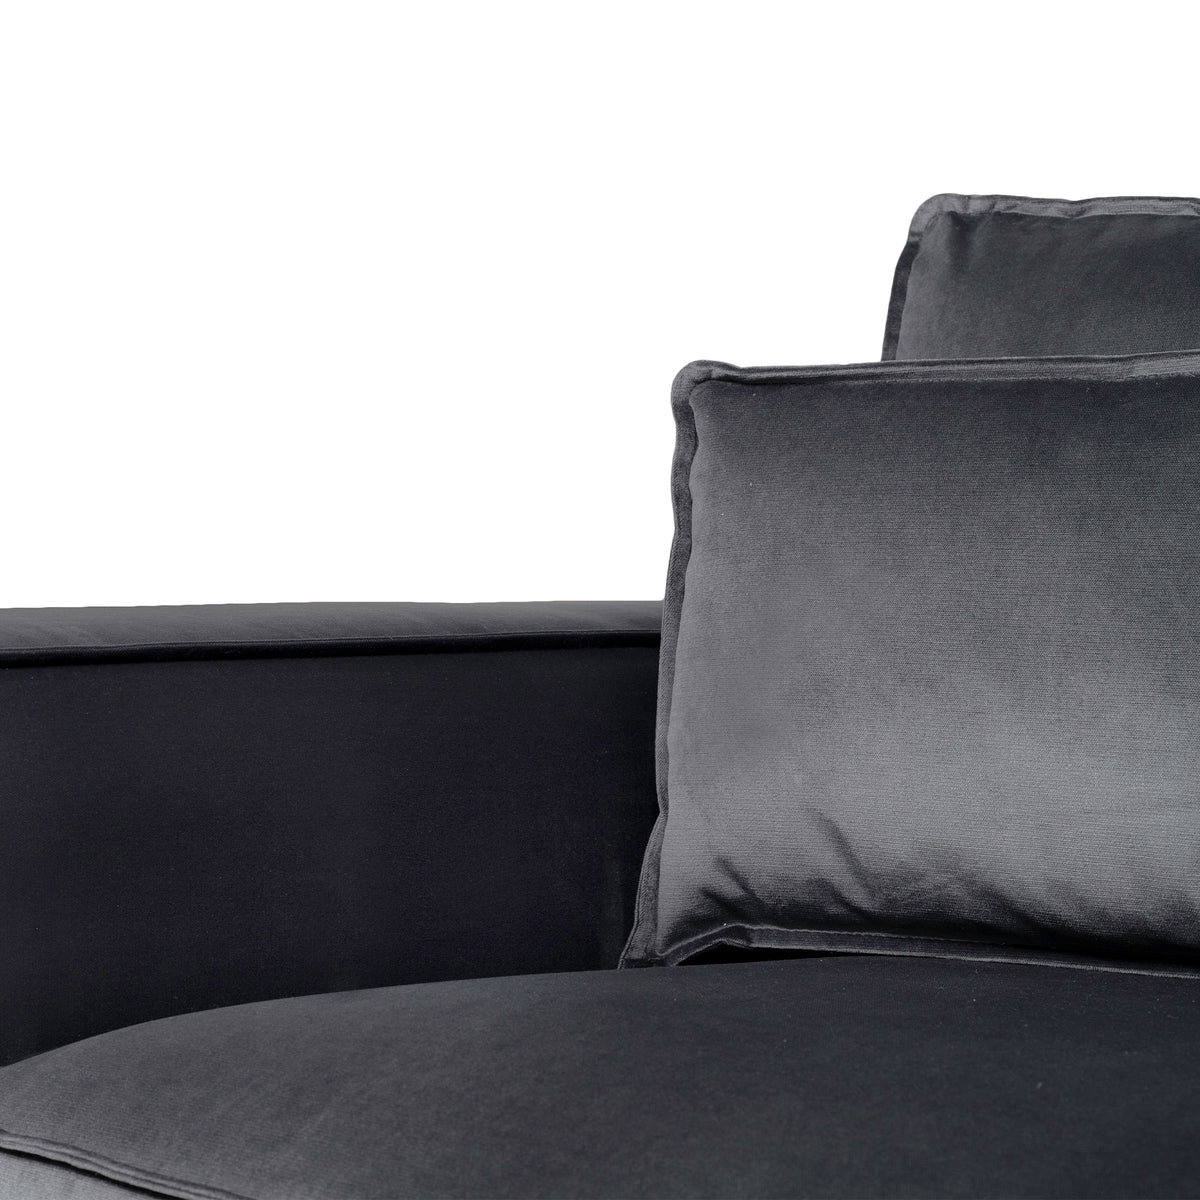 Sloane Luxe Chenille Charcoal 2 Seat Sofa - Close up of sofa arm